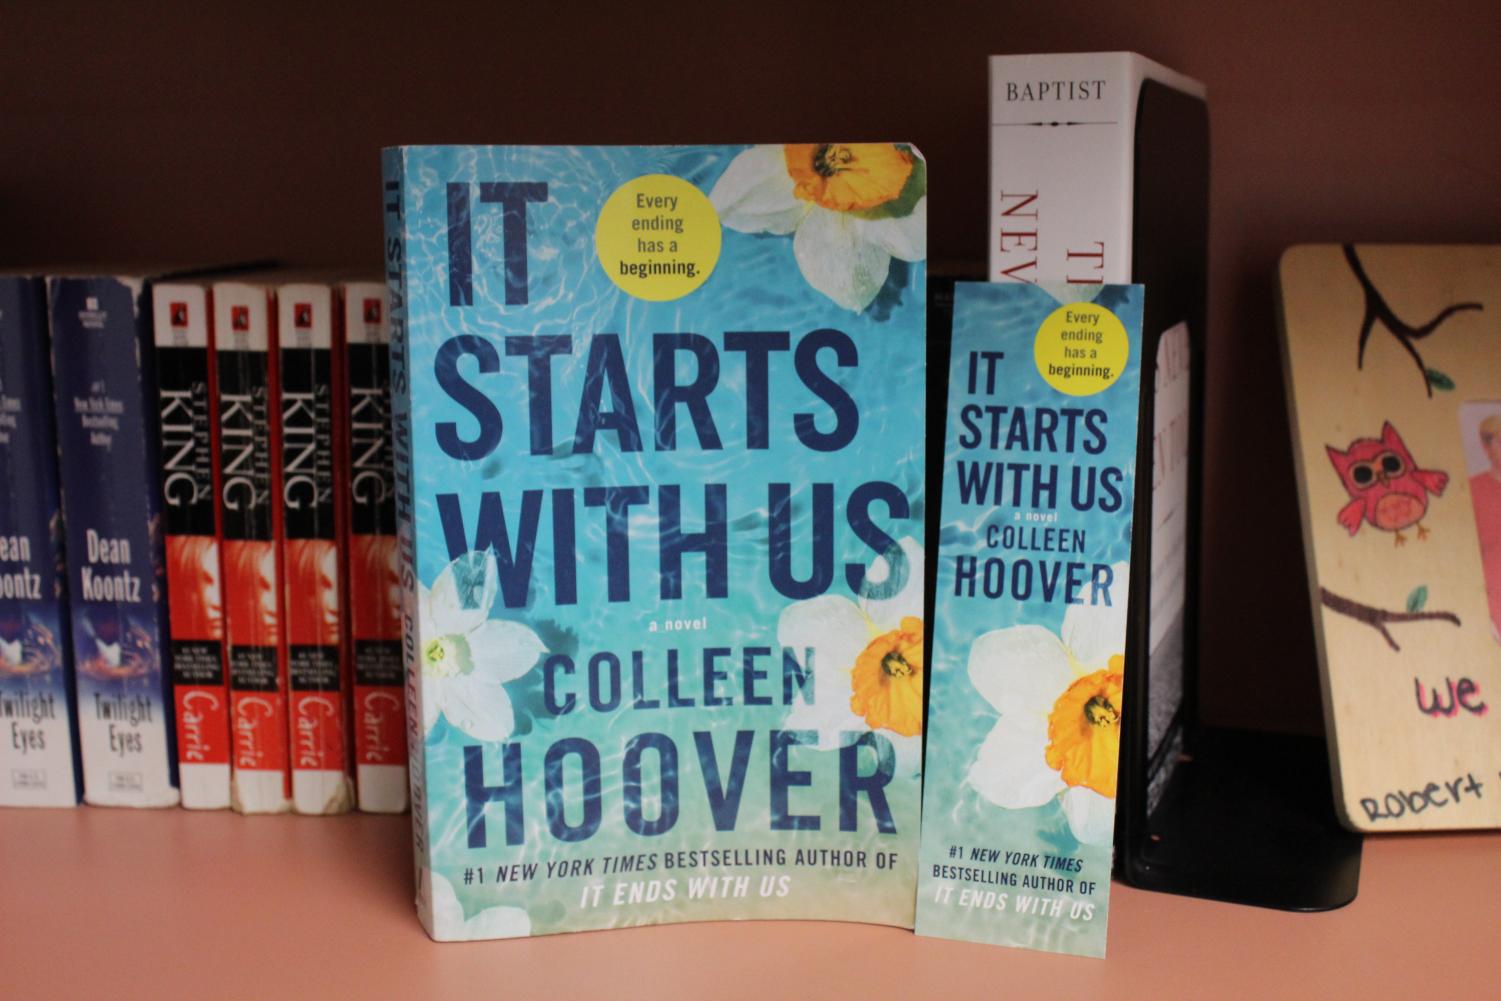 Review] “It Starts With Us” by Colleen Hoover is a drama-filled